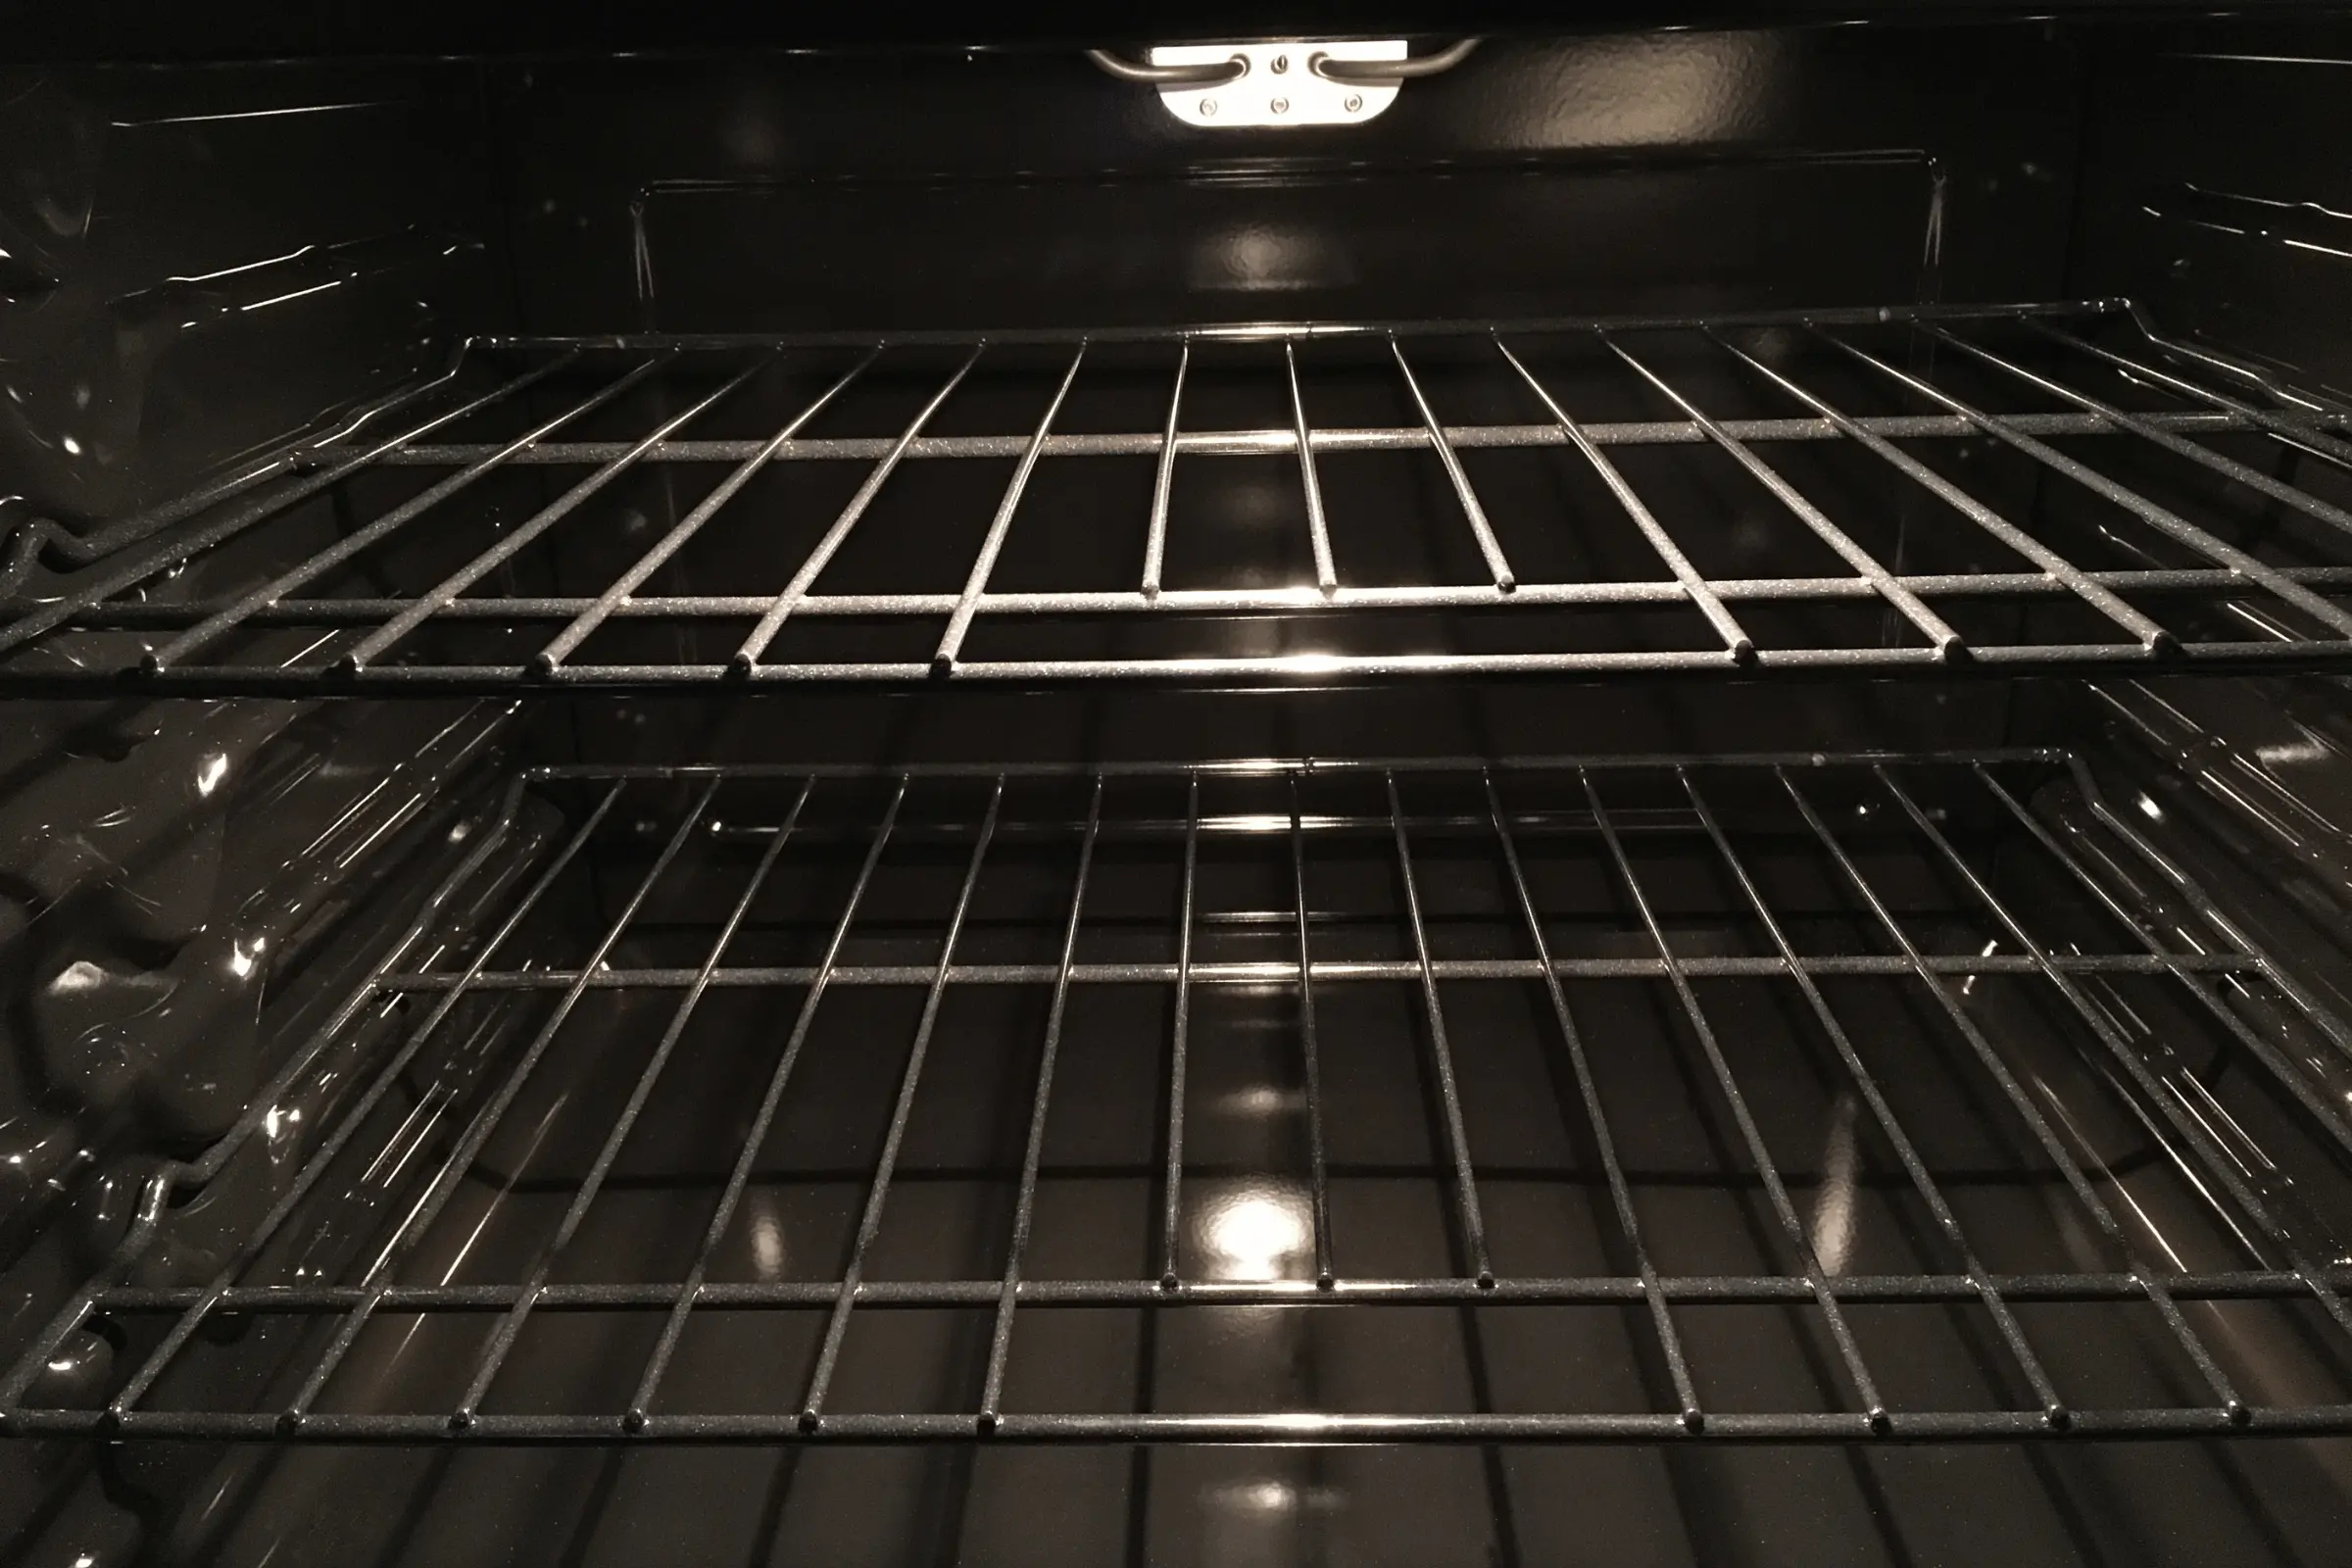 Professional Oven Cleaning Services in London _ Klense - 02